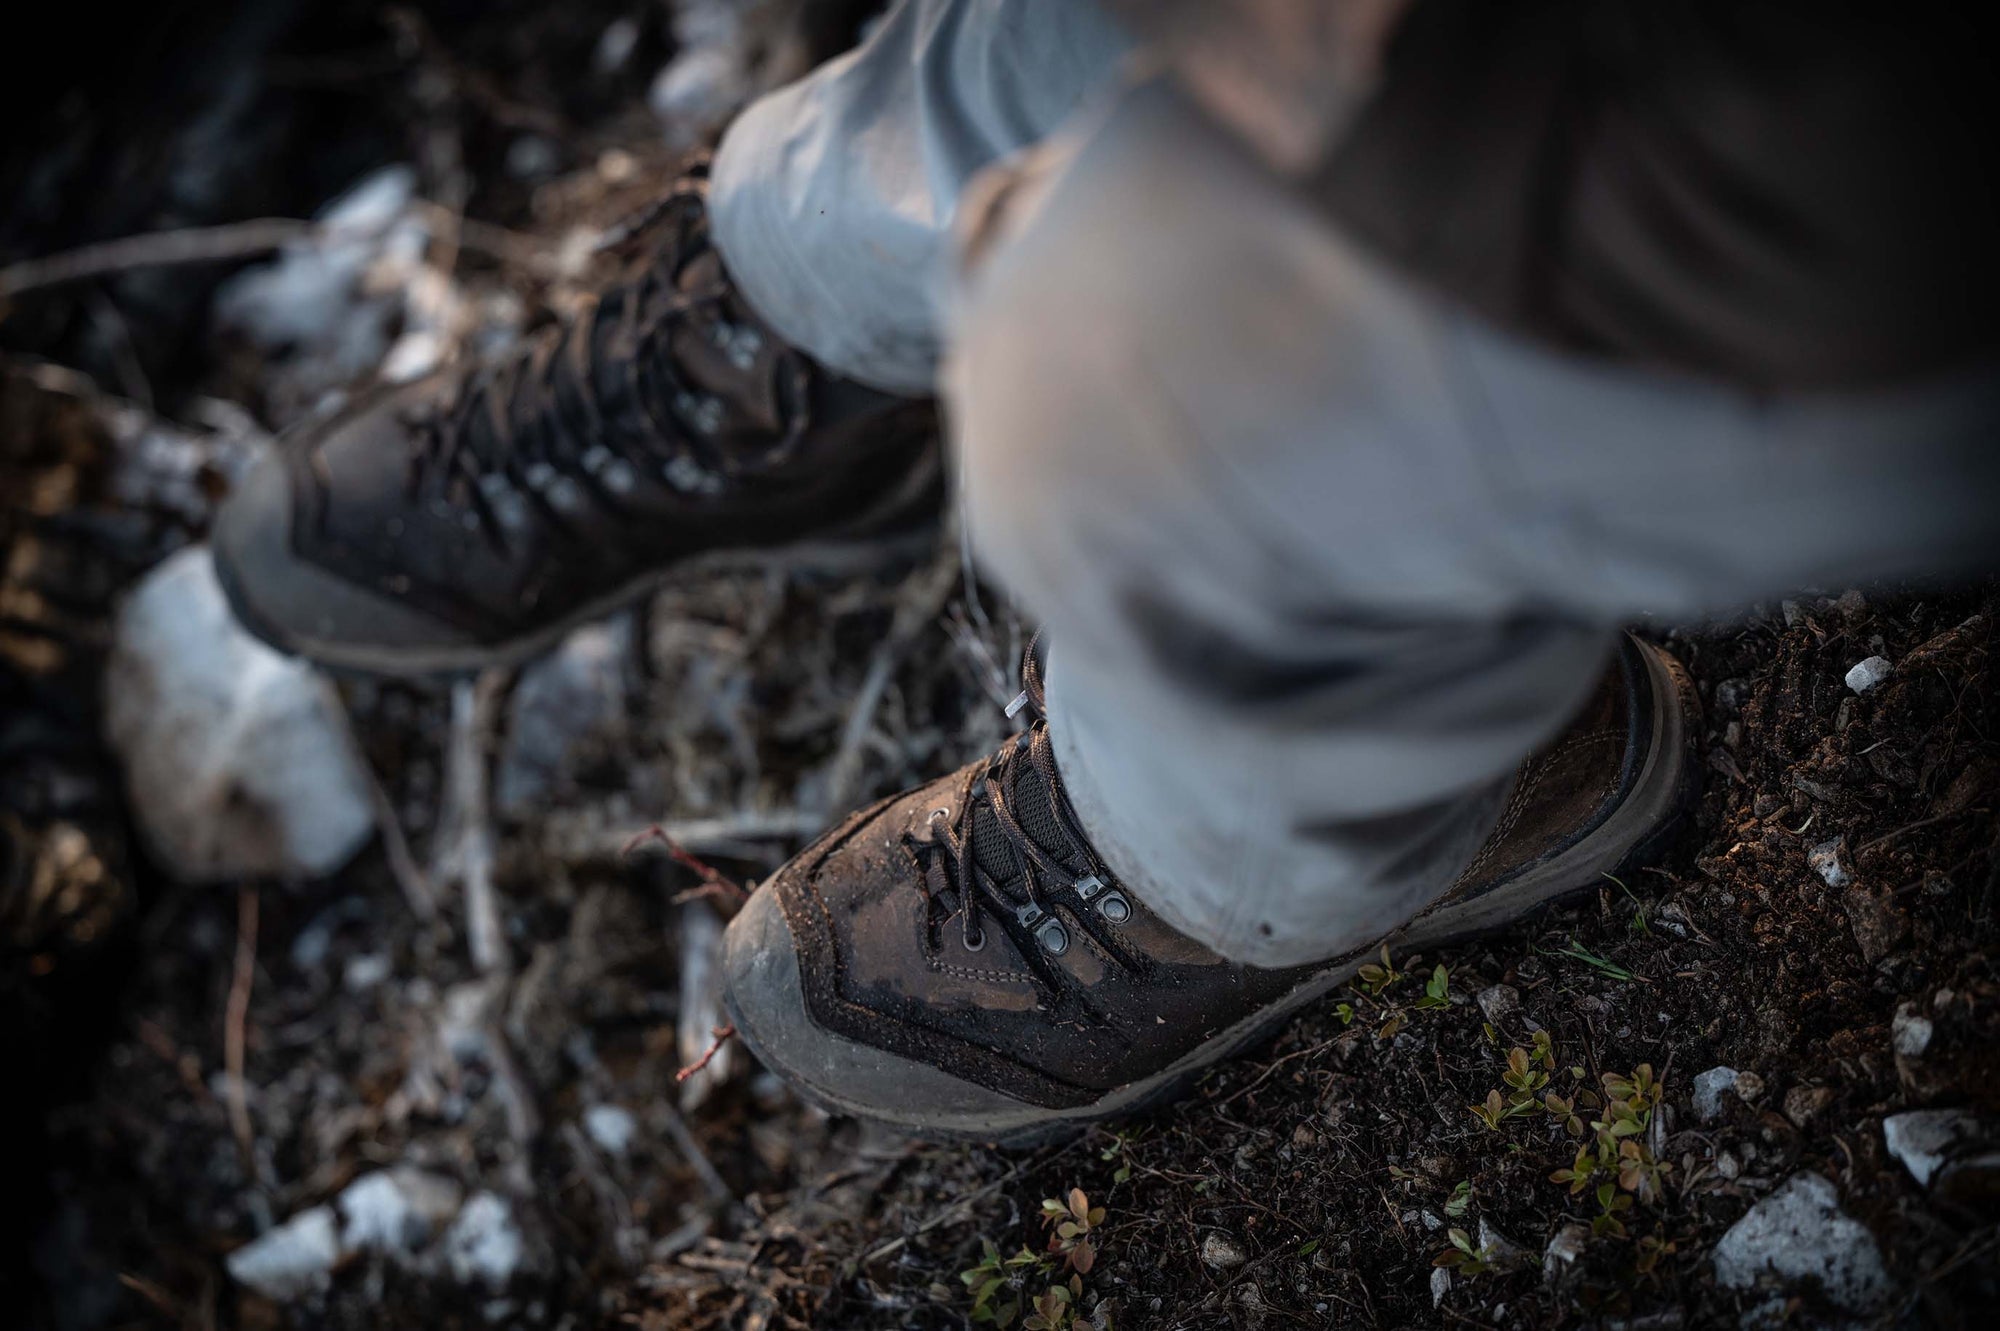 Meindl USA | Meindl Hunting and Hiking Boots | Official Site